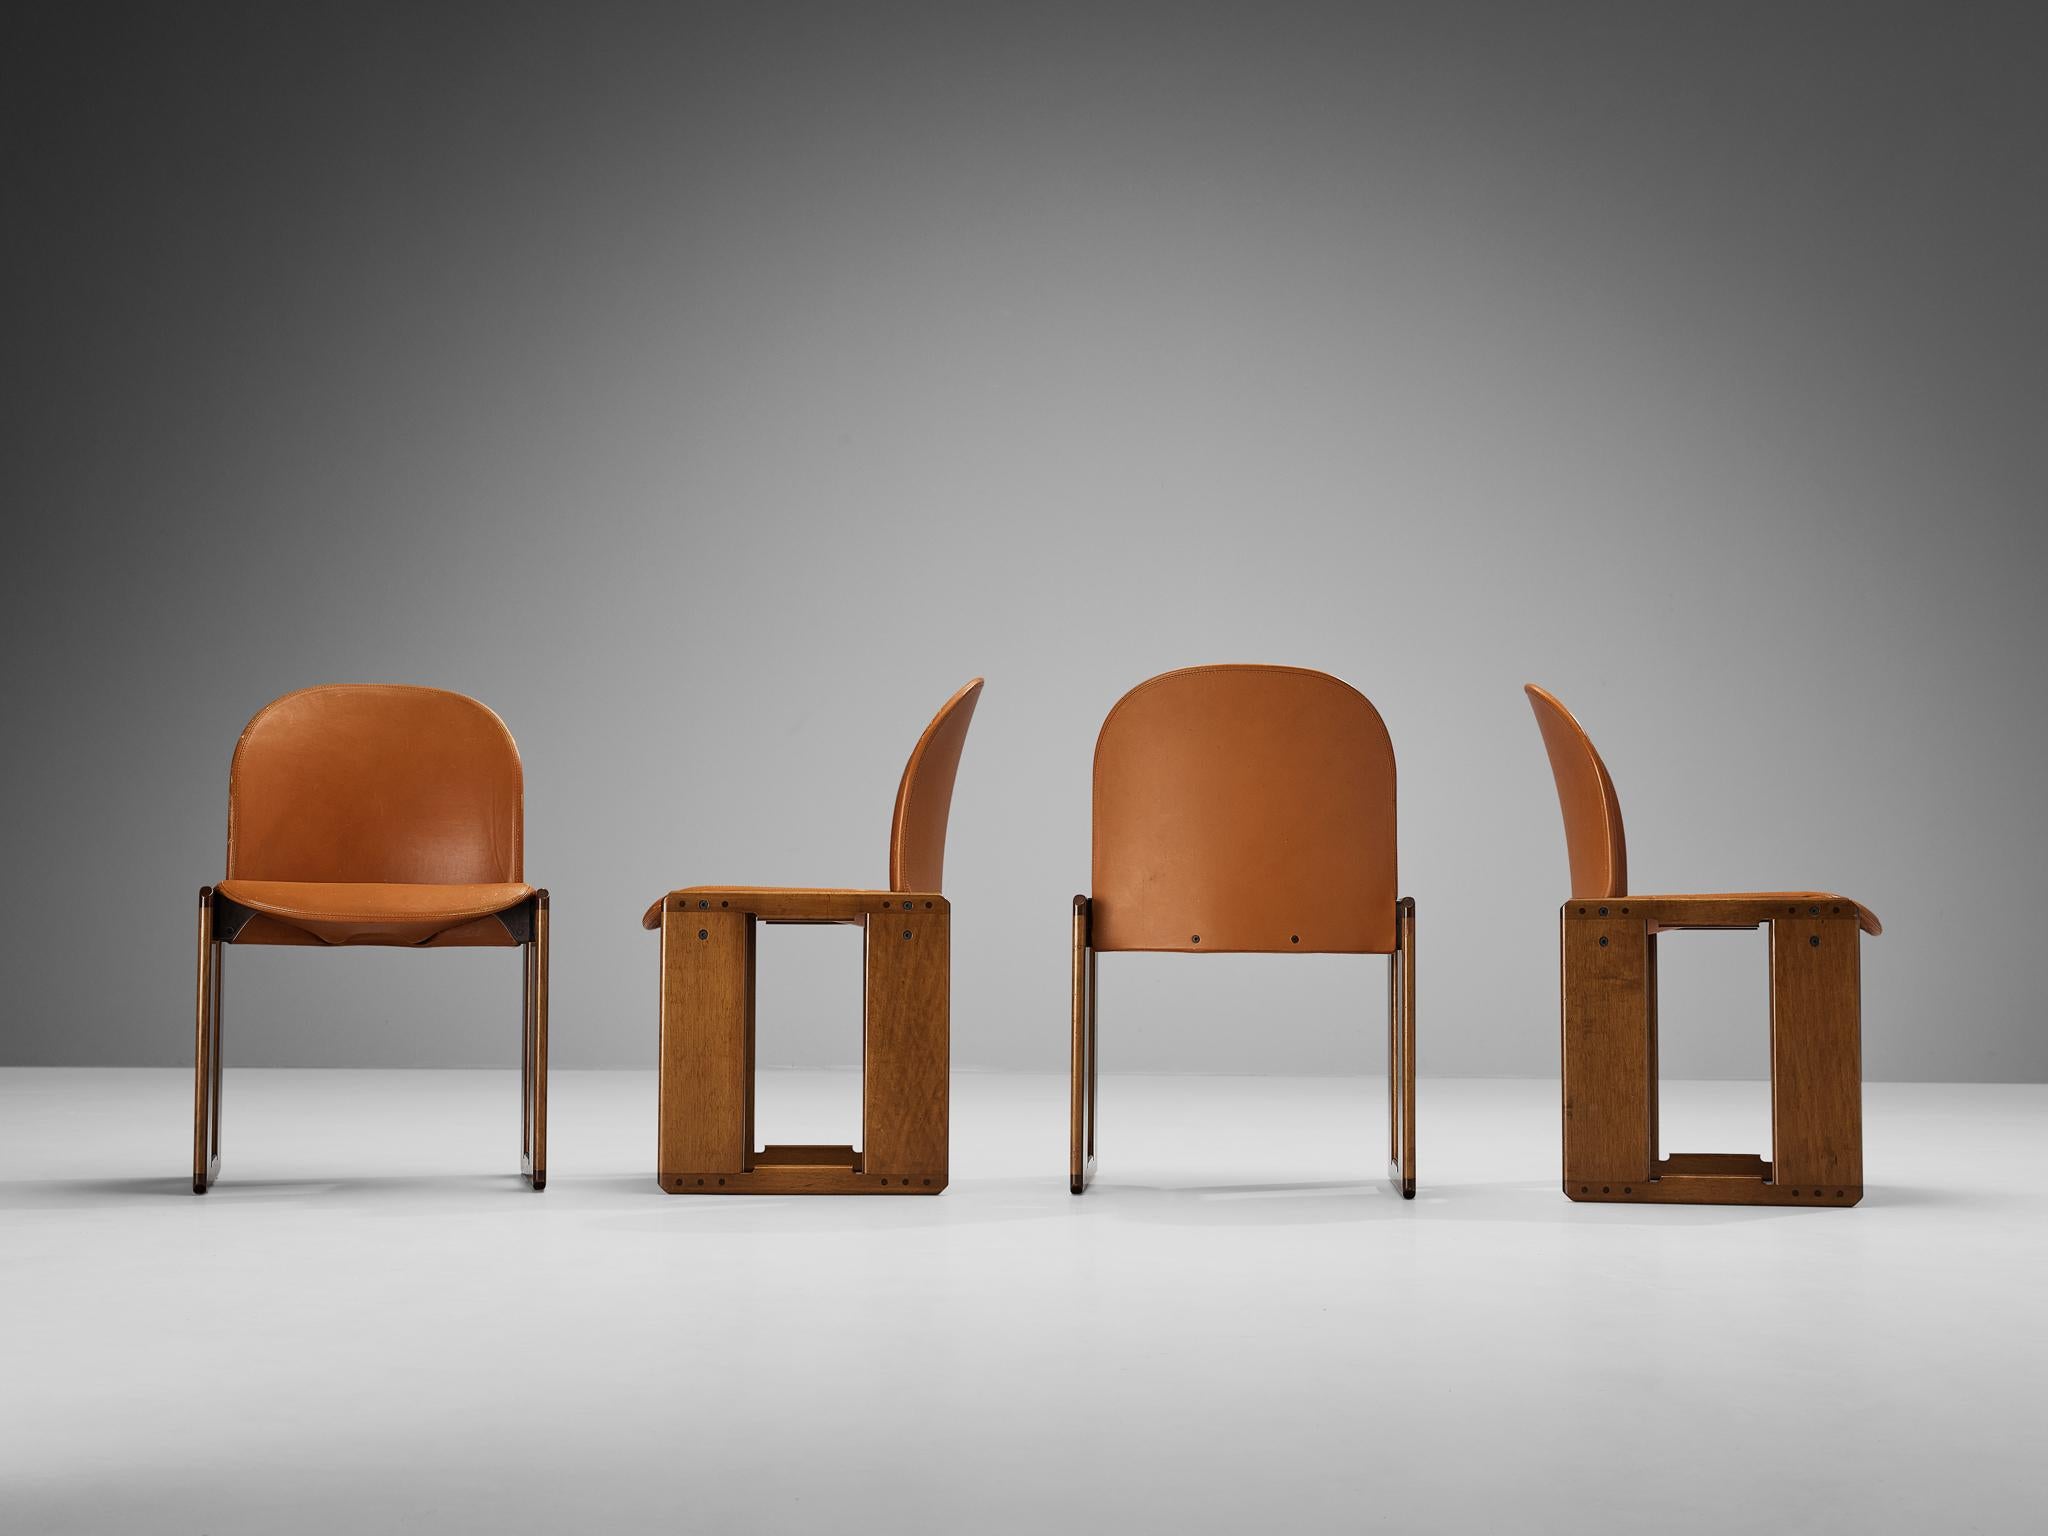 Metal Afra & Tobia Scarpa Set of Four 'Dialogo' Dining Chairs in Cognac Leather